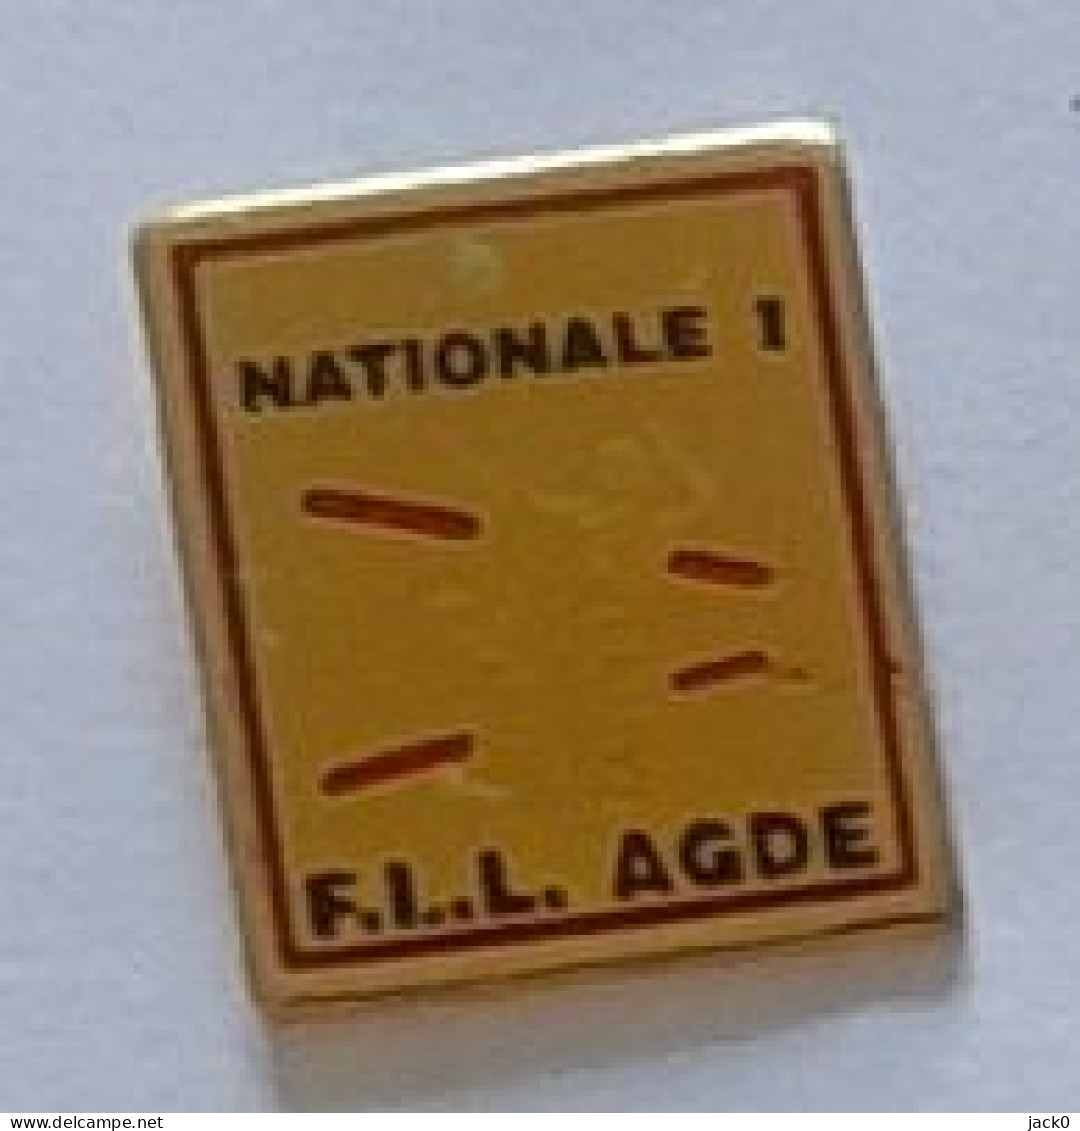 Pin's  Ville, Sport  Volleyball  NATIONALE 1  F.L.L  AGDE  ( 34 ) - Volleyball